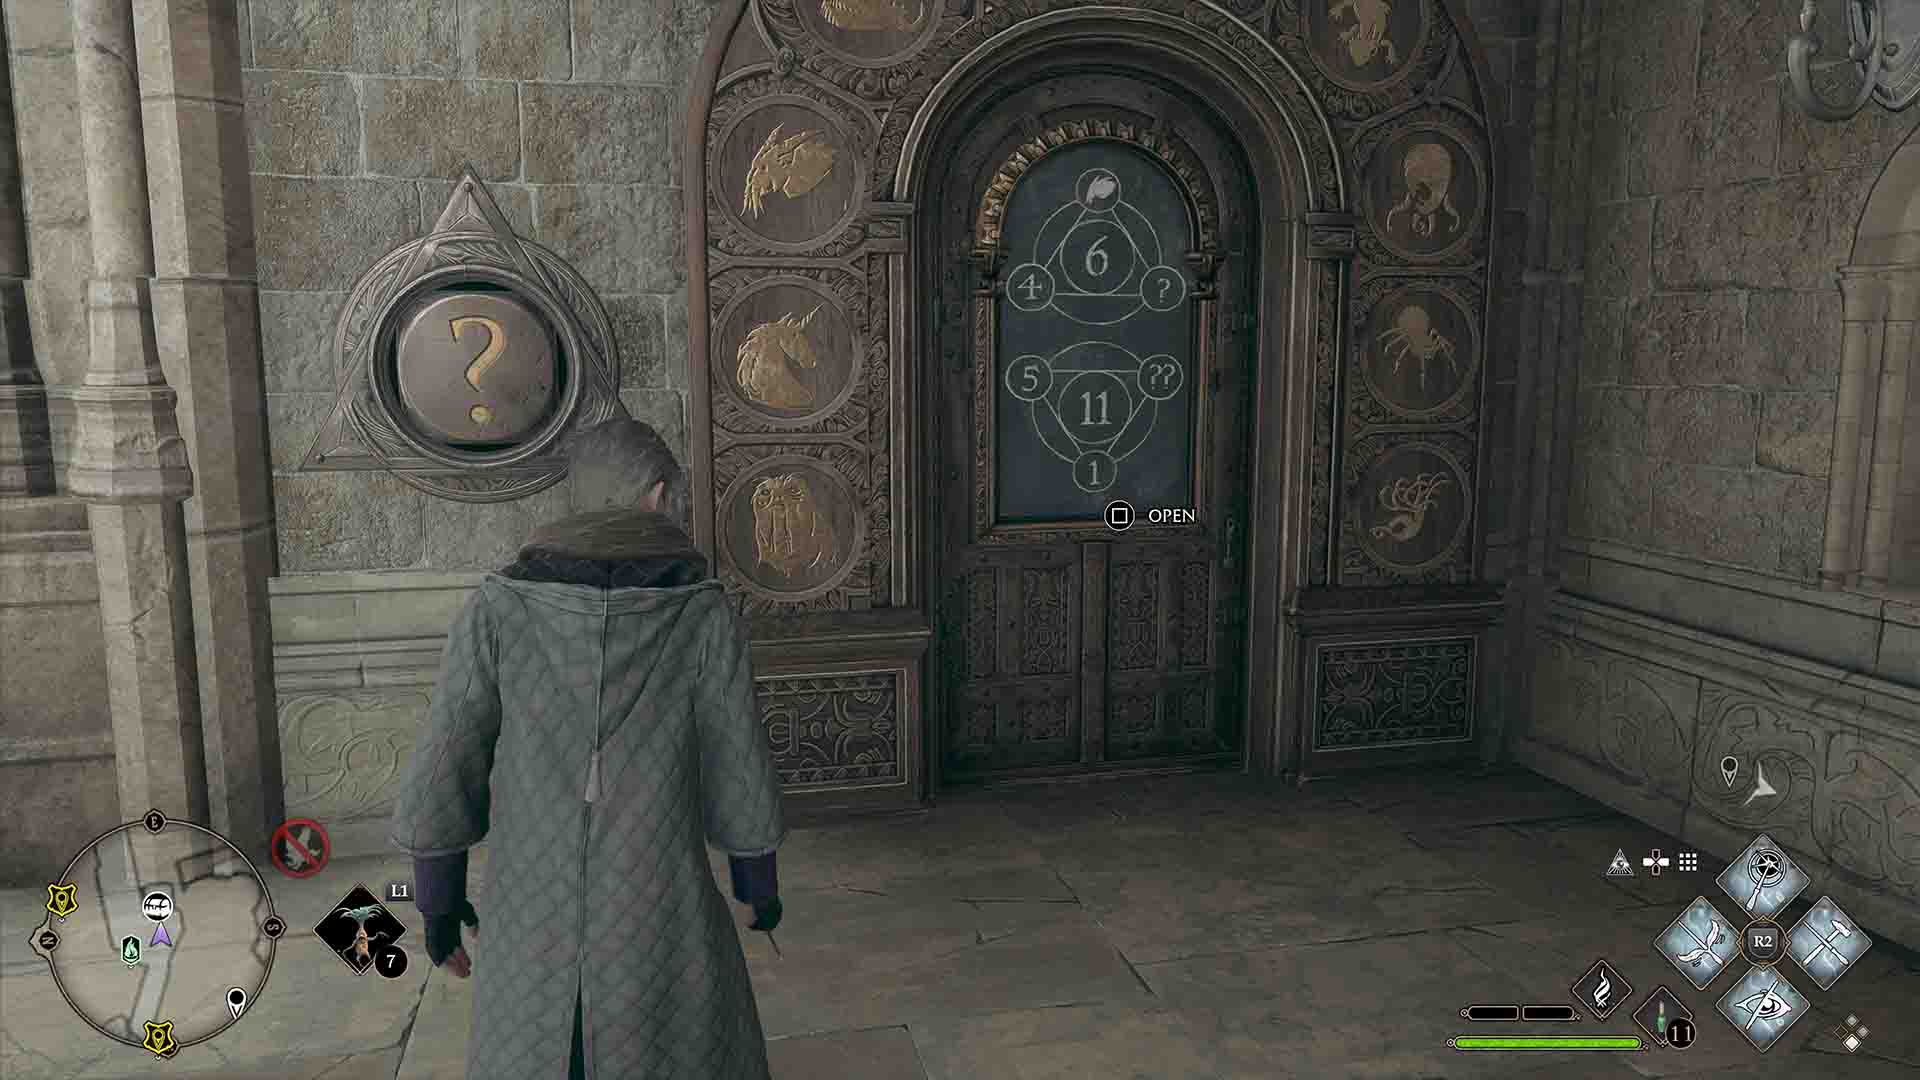 solve the and How number puzzles symbol puzzle Legacy to doors Hogwarts |